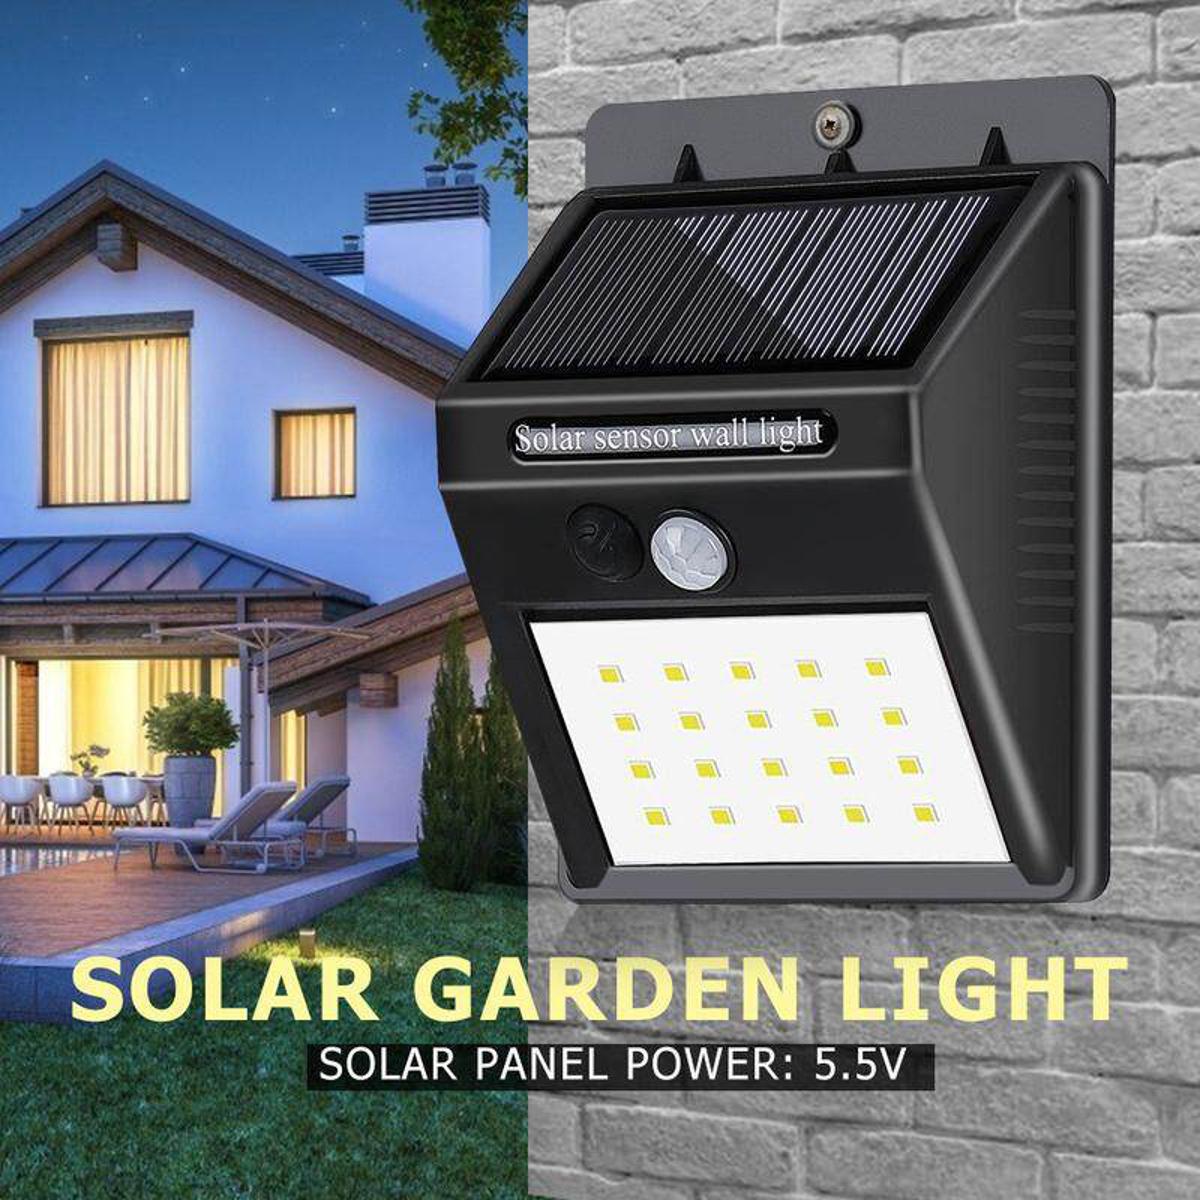 100% Brand new&high quality. Light the entrance to your home or garden. Also widely used for illumination in pathway, driveway, yard, aisle, porch, patio, and anywhere in which getting solar energy